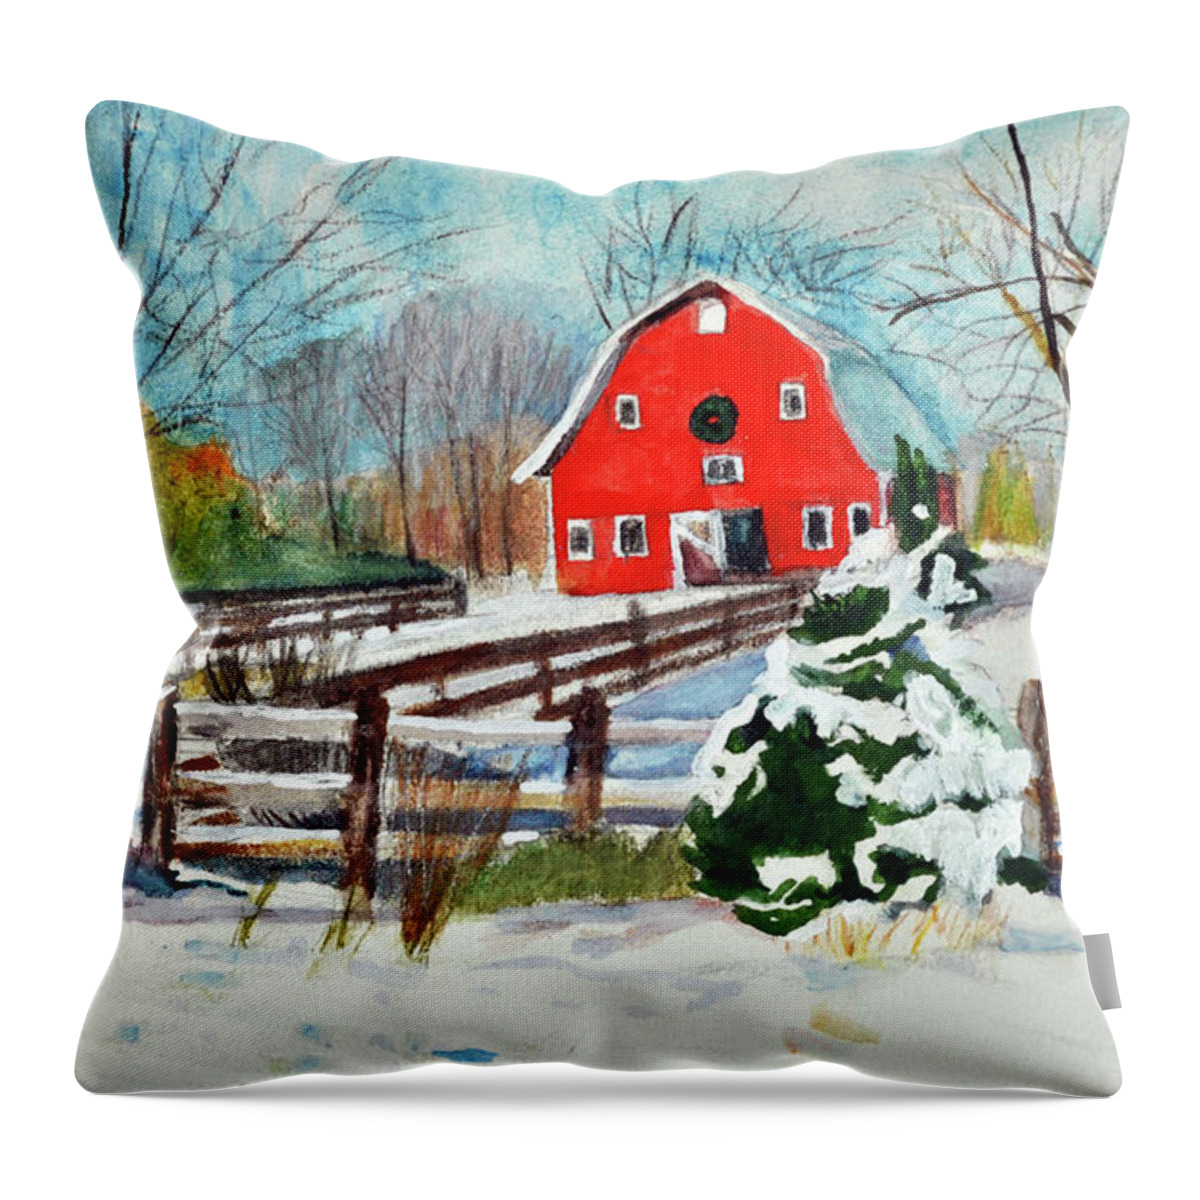 Barn Throw Pillow featuring the mixed media Country Christmas by Lori Moon